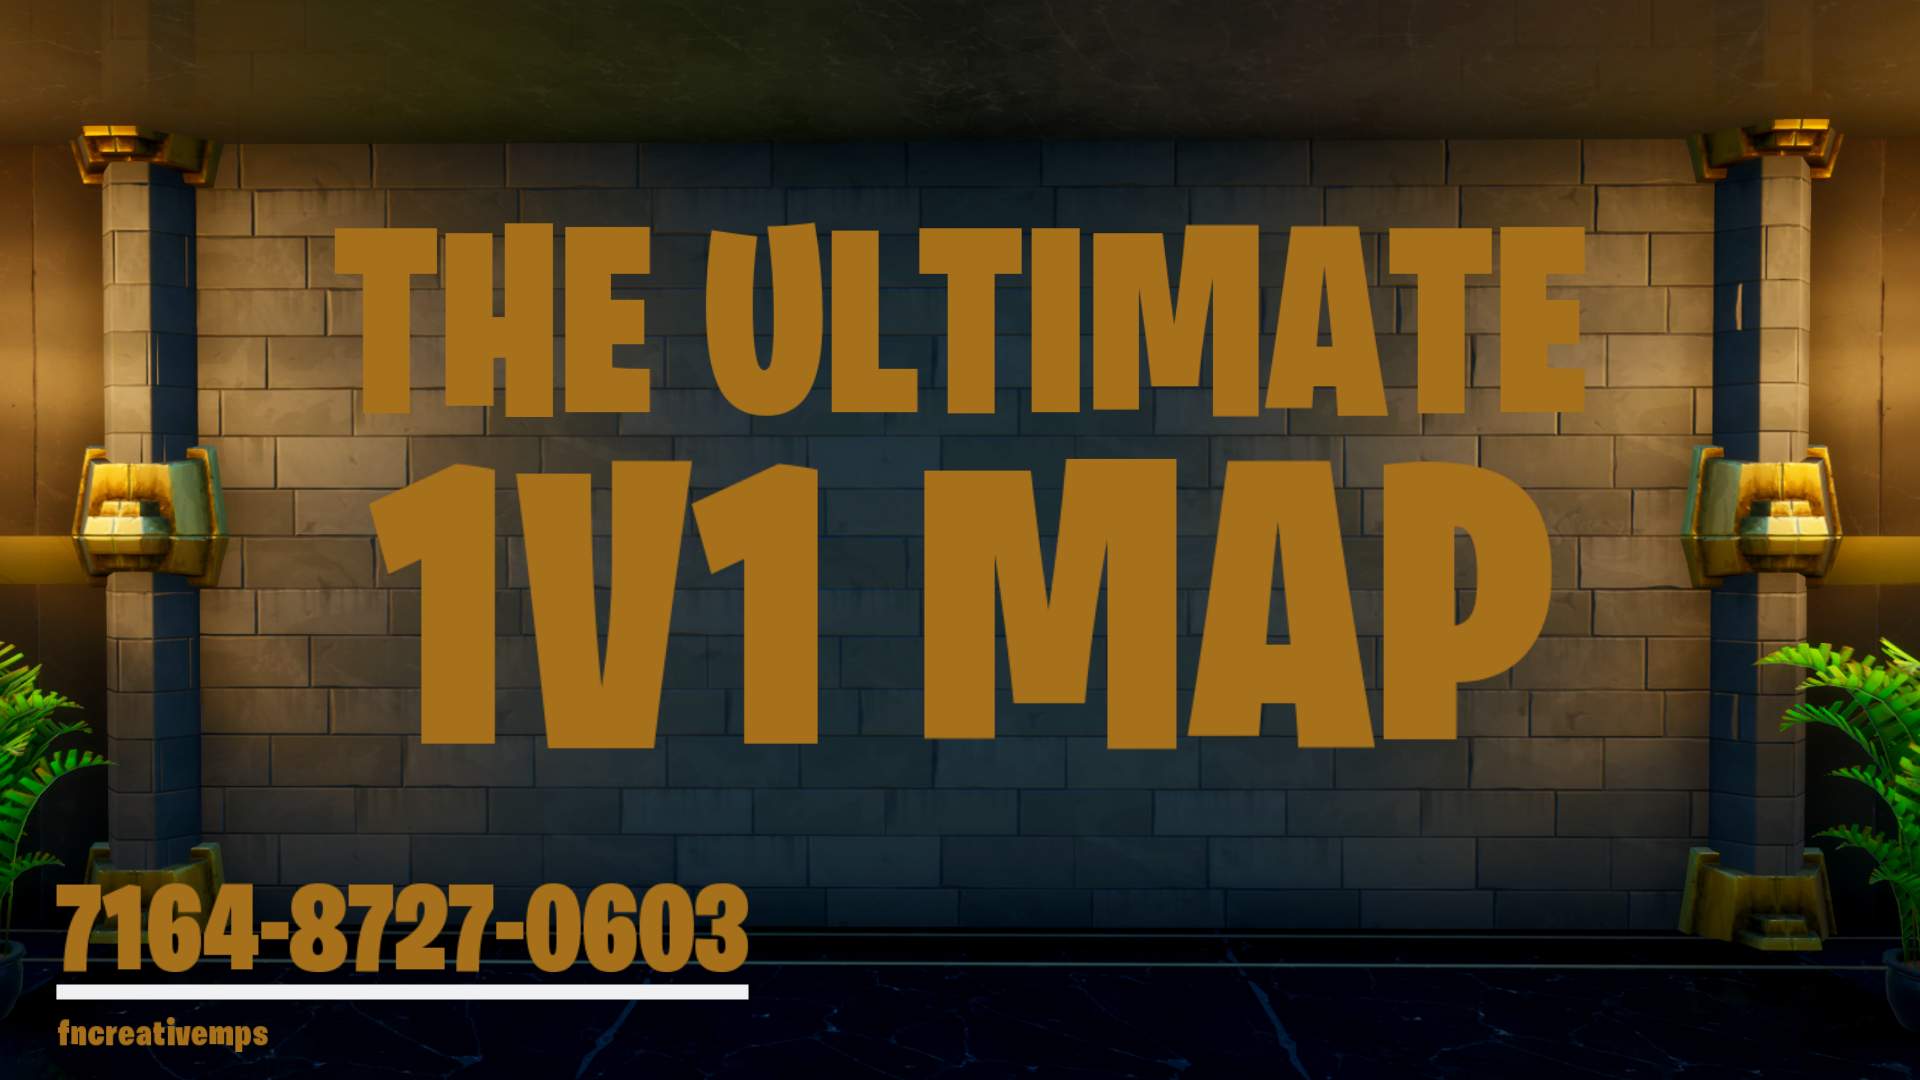 1v1 with any gun map code